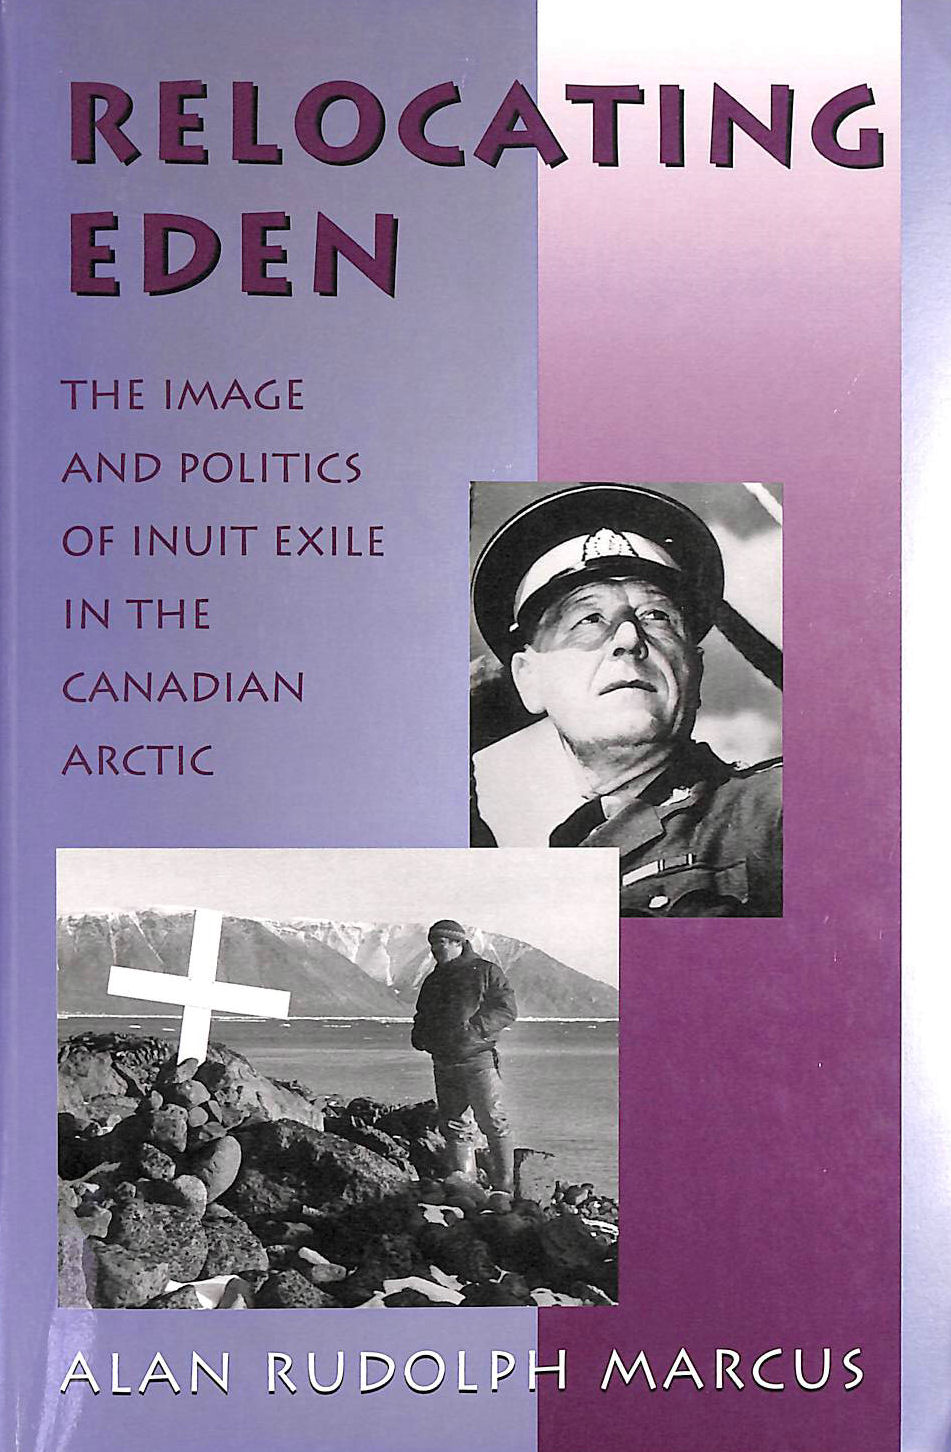 MARCUS, ALAN RUDOLPH - Relocating Eden: The Image and Politics of Inuit Exile in the Canadian Arctic (Arctic Visions)